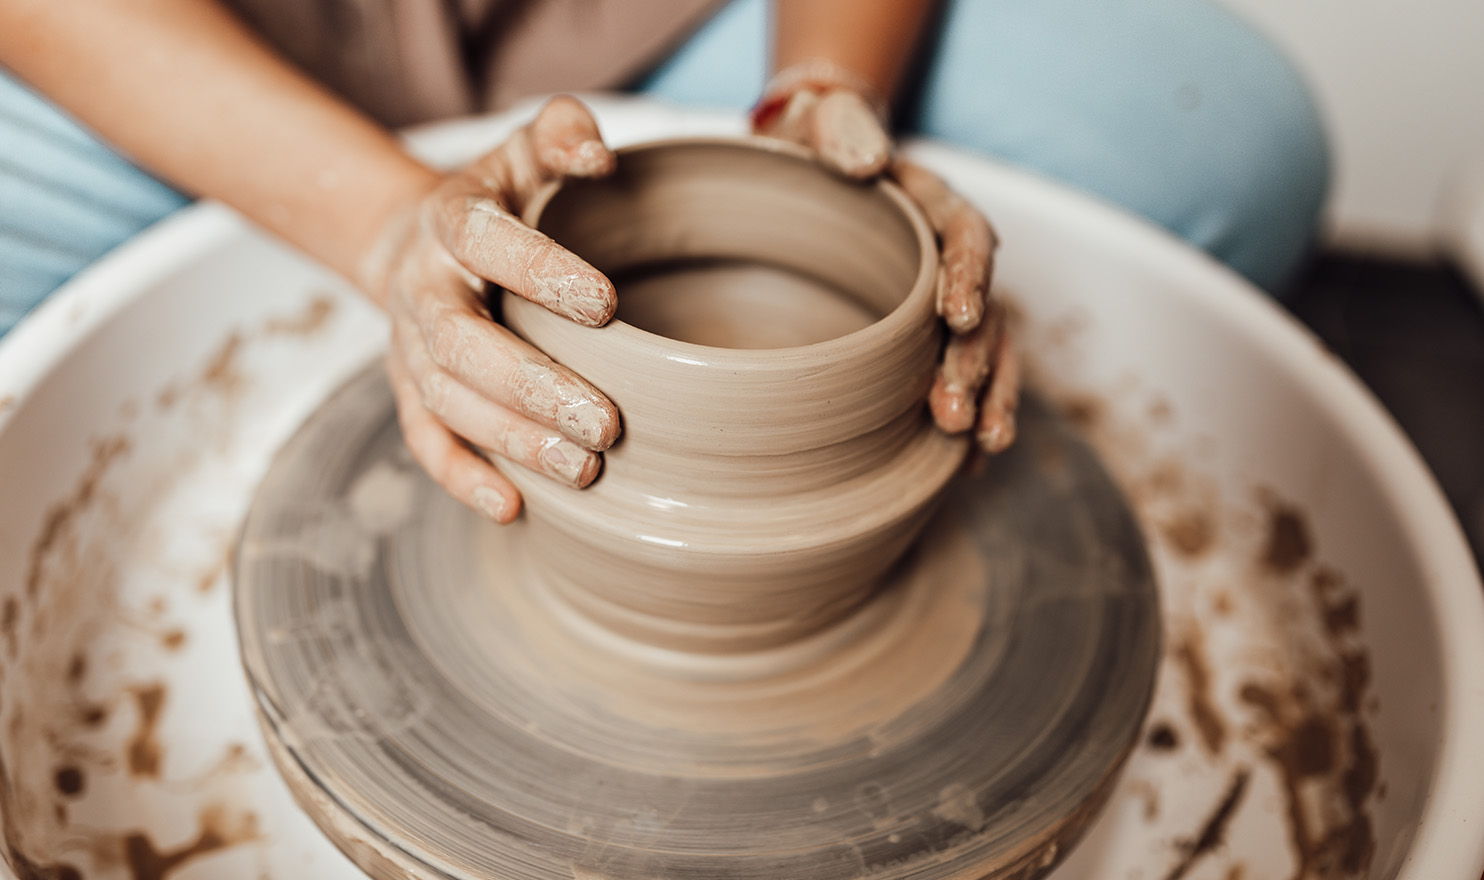 A potter's hands are shaping and molding clay on a wheel into a pot.